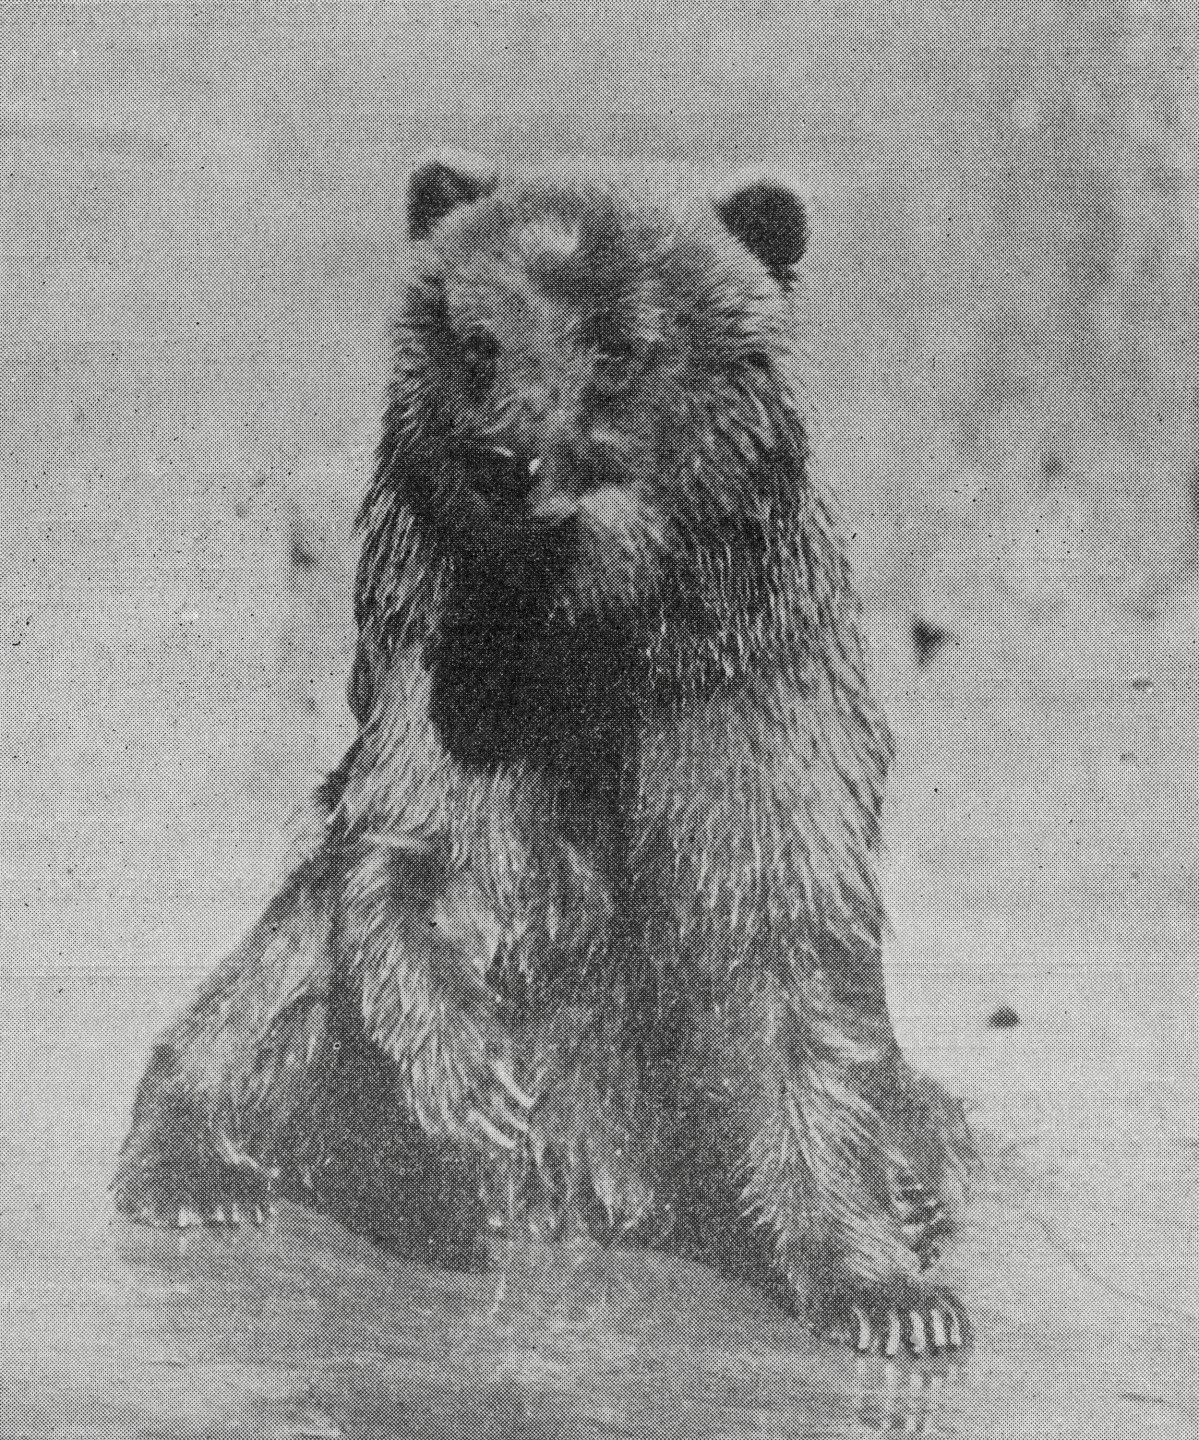 One of the first animals added to the brand-new Zoo was Caesar the bear. She had been a mascot aboard a ship, but became too unruly for the crew to handle. When she disembarked at the harbor, Dr. Thompson drove her to the Zoo in his car!